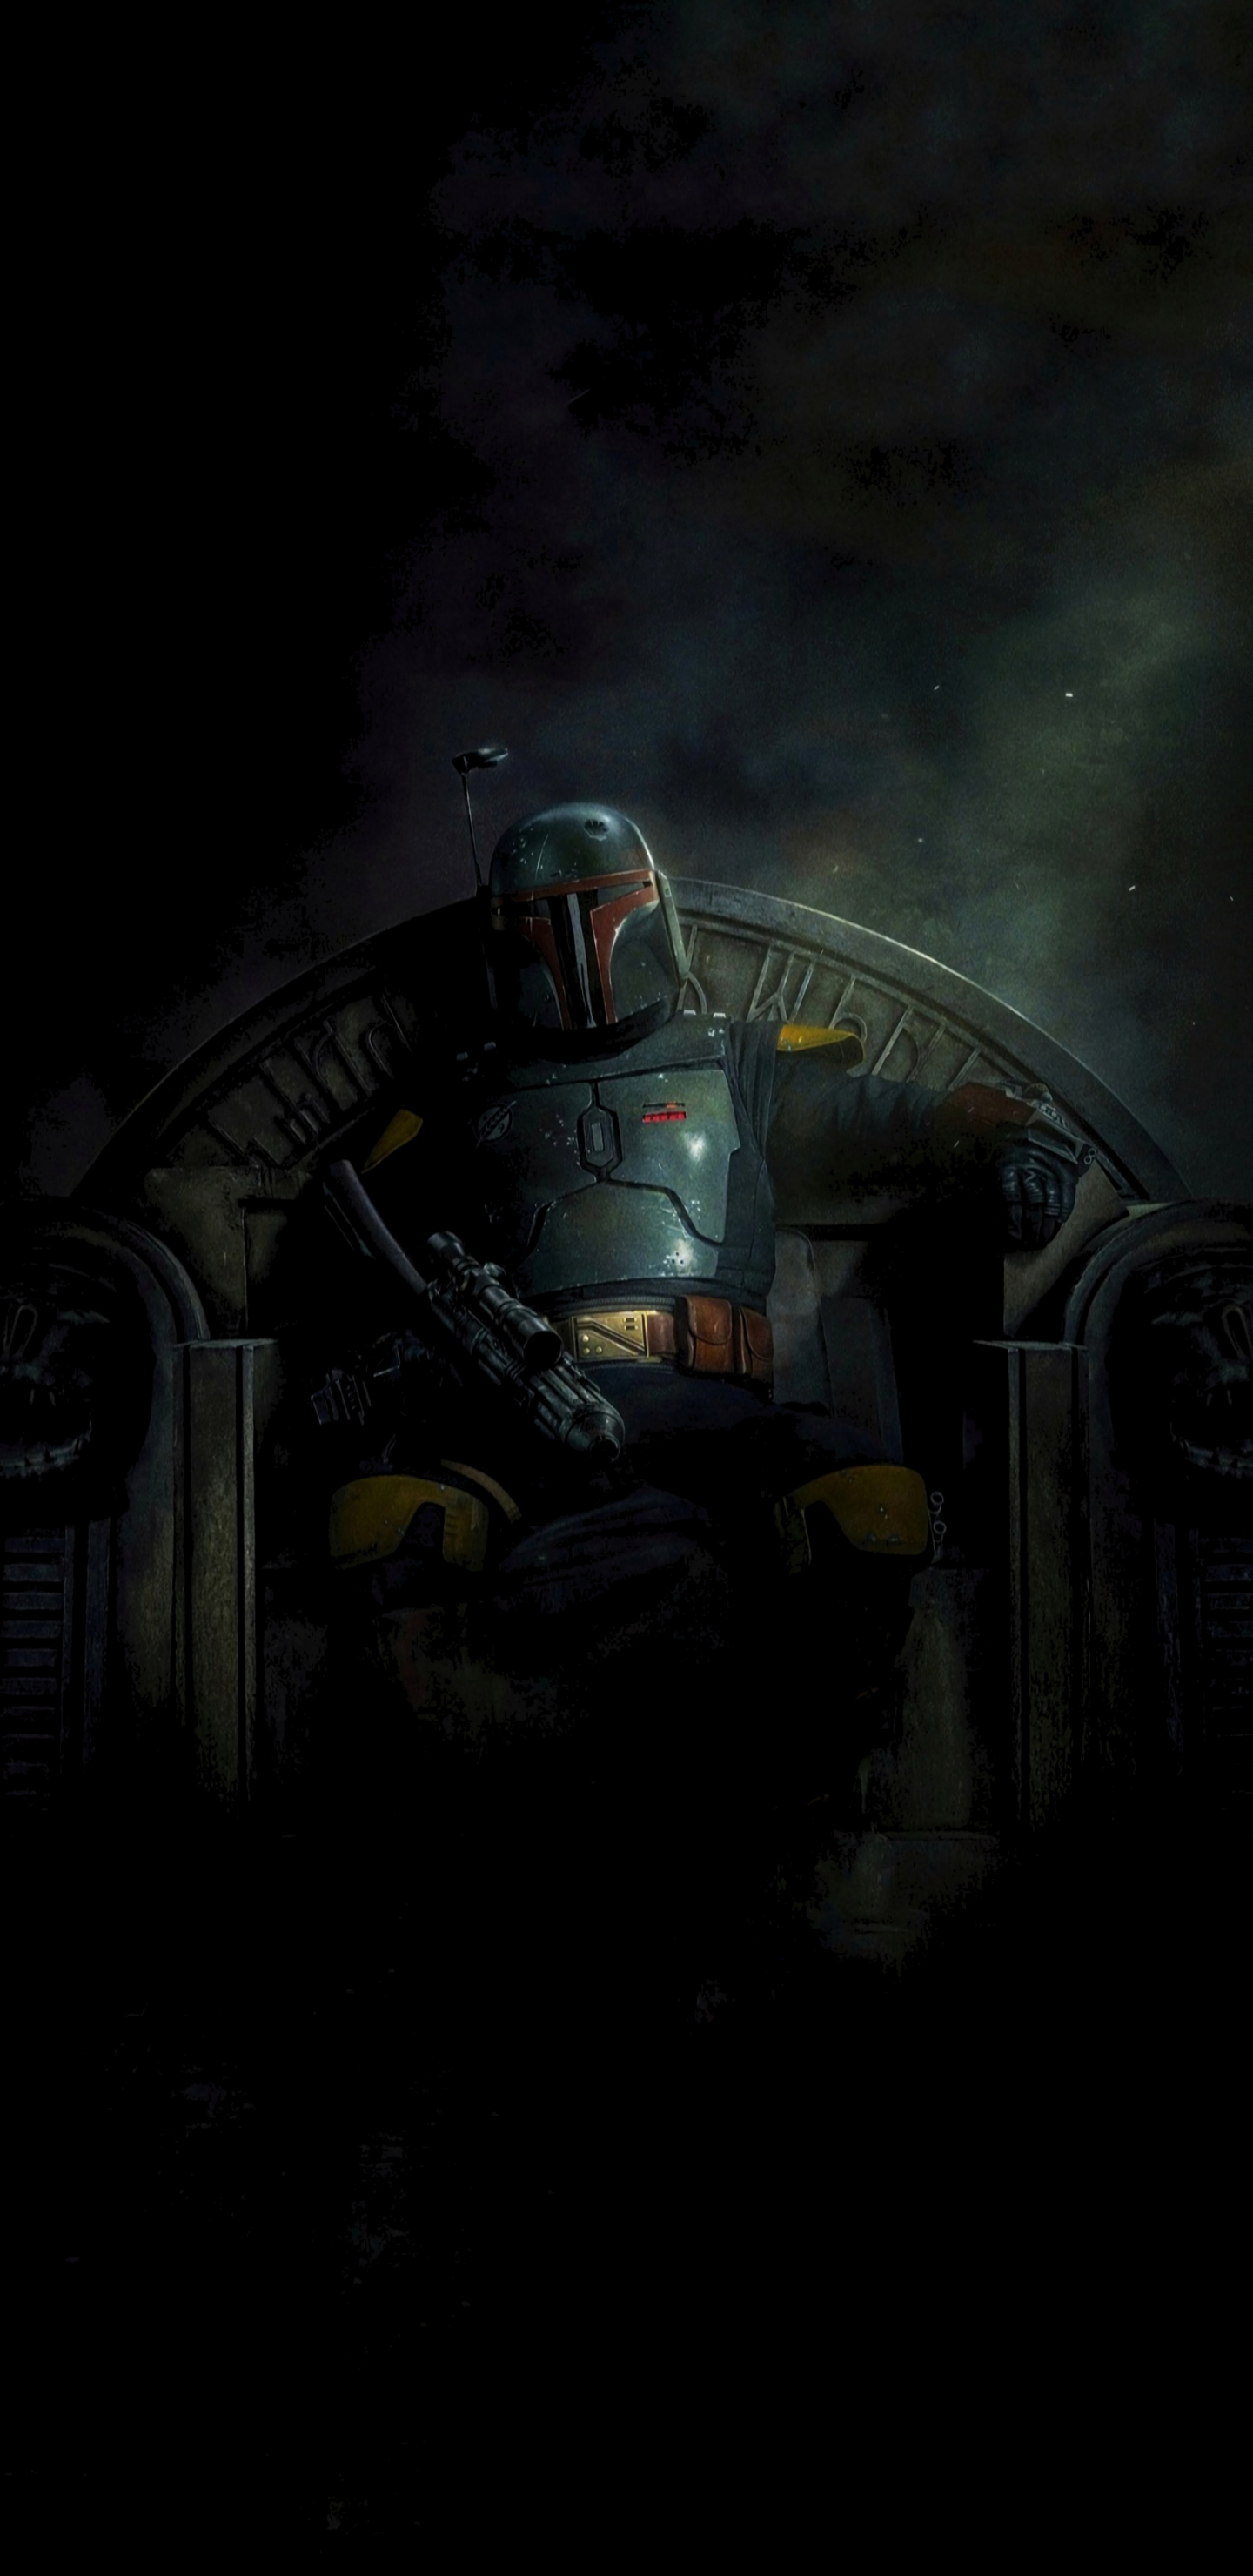 1440x2960 The Book of Boba Fett 2021 Samsung Galaxy Note 9,8, S9,S8,S8